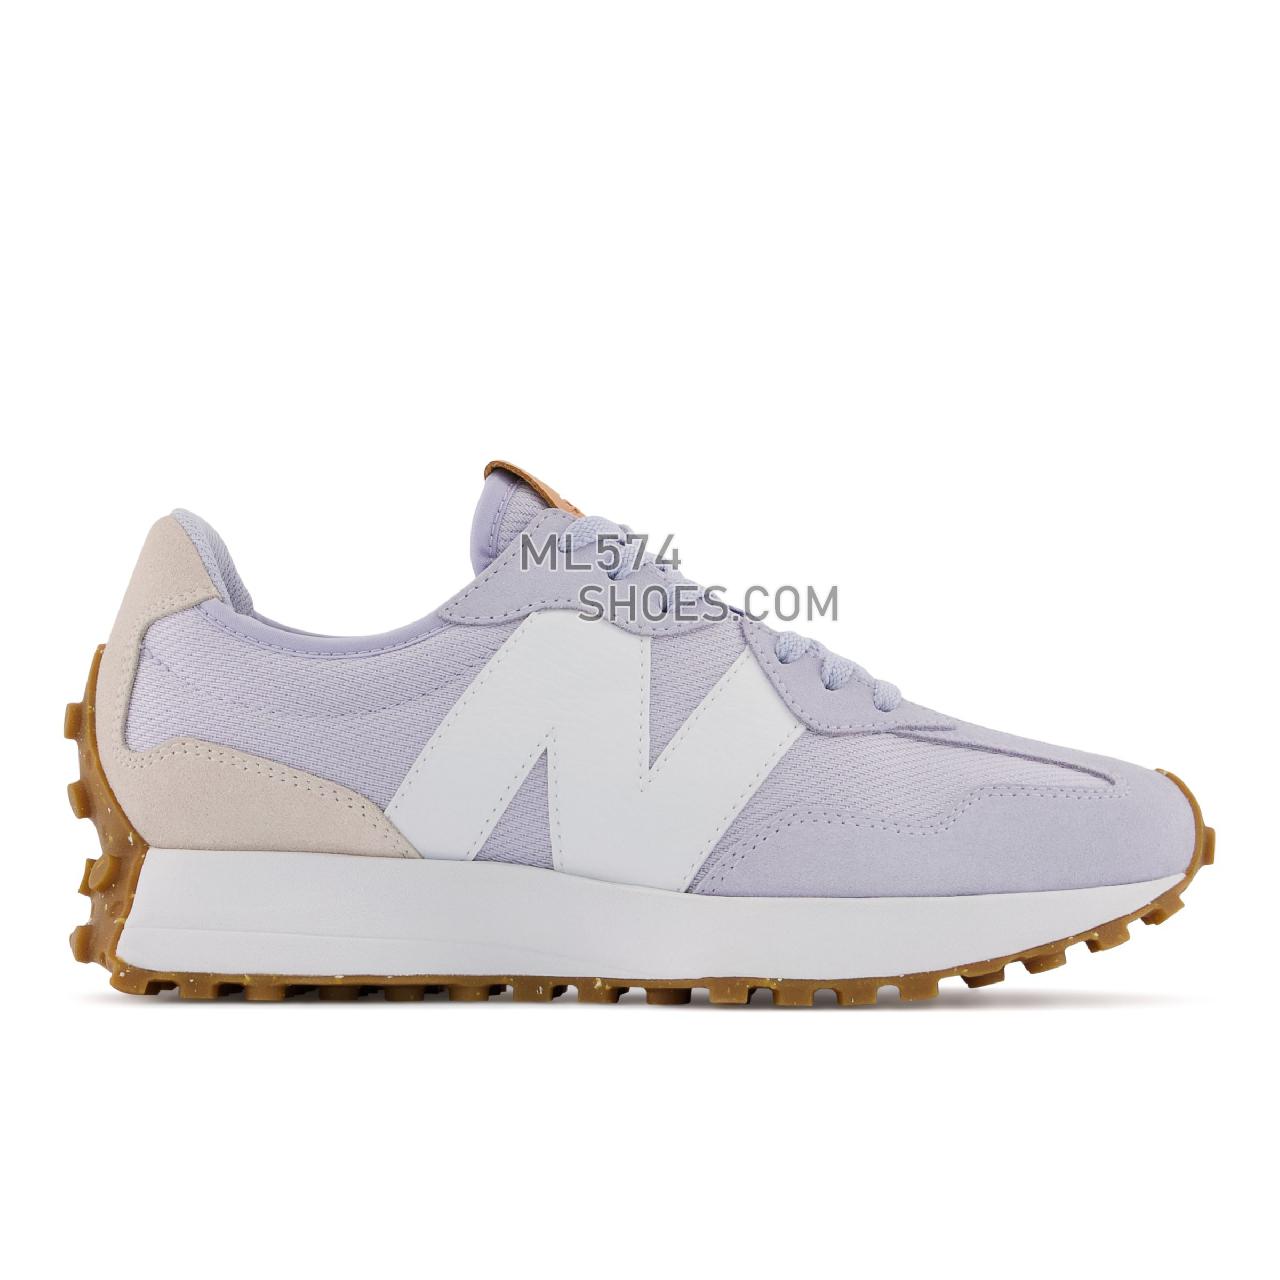 New Balance 327 - Women's Sport Style Sneakers - Violet Haze with Macadamia Nut - WS327RC